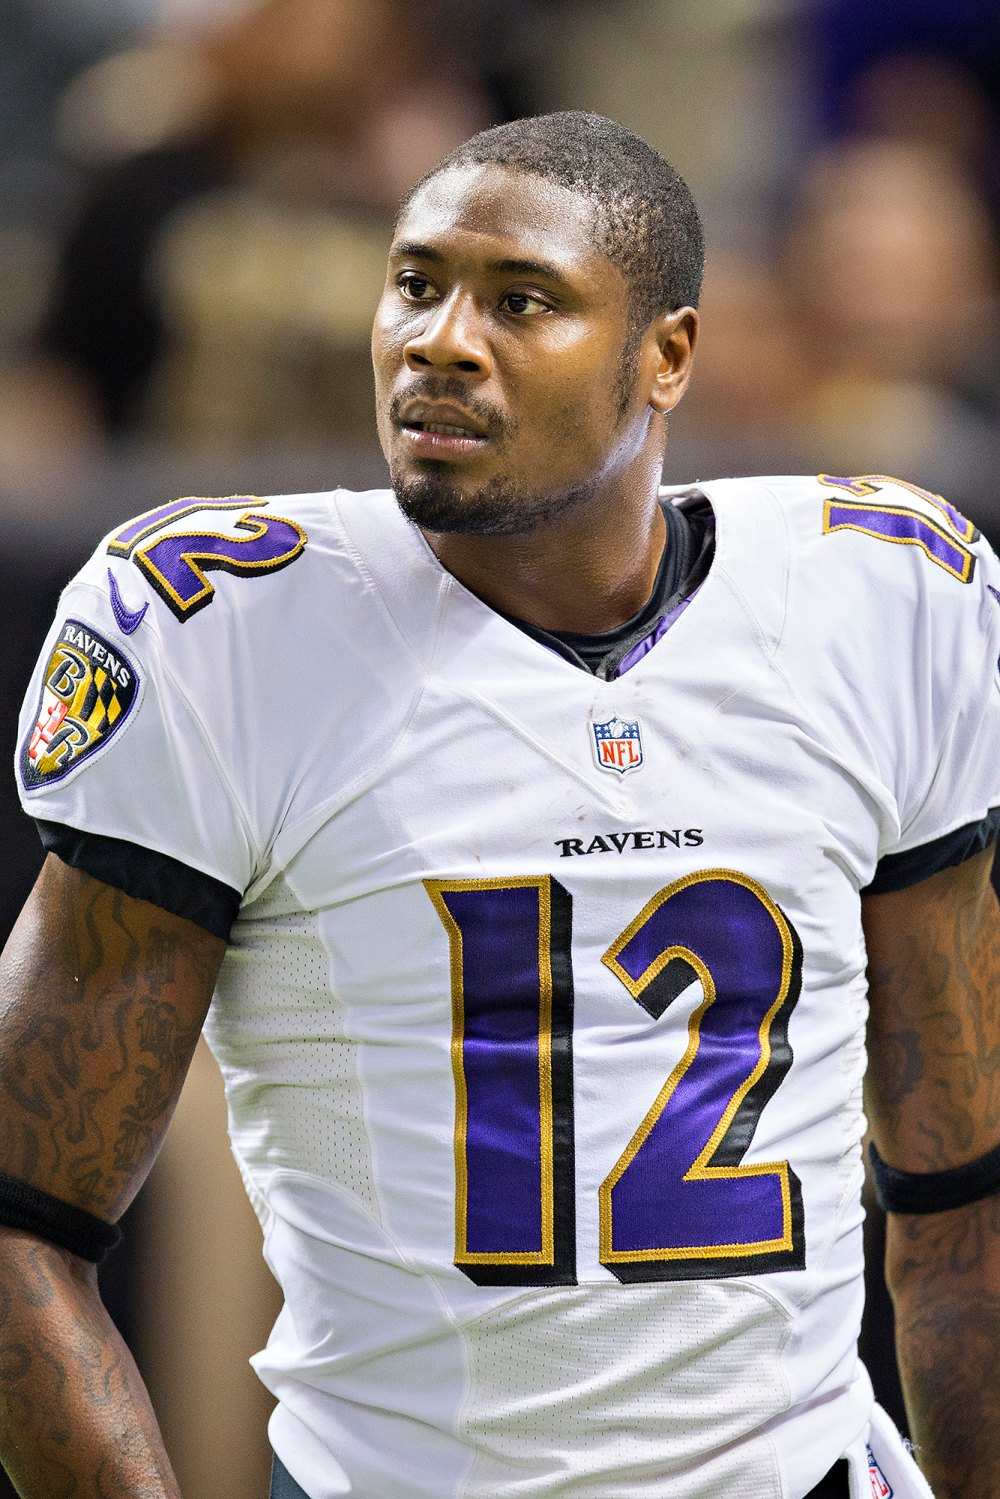 Robert Griffin III, JJ Watt and other stars react to Jacoby Jones' death at the age of 40